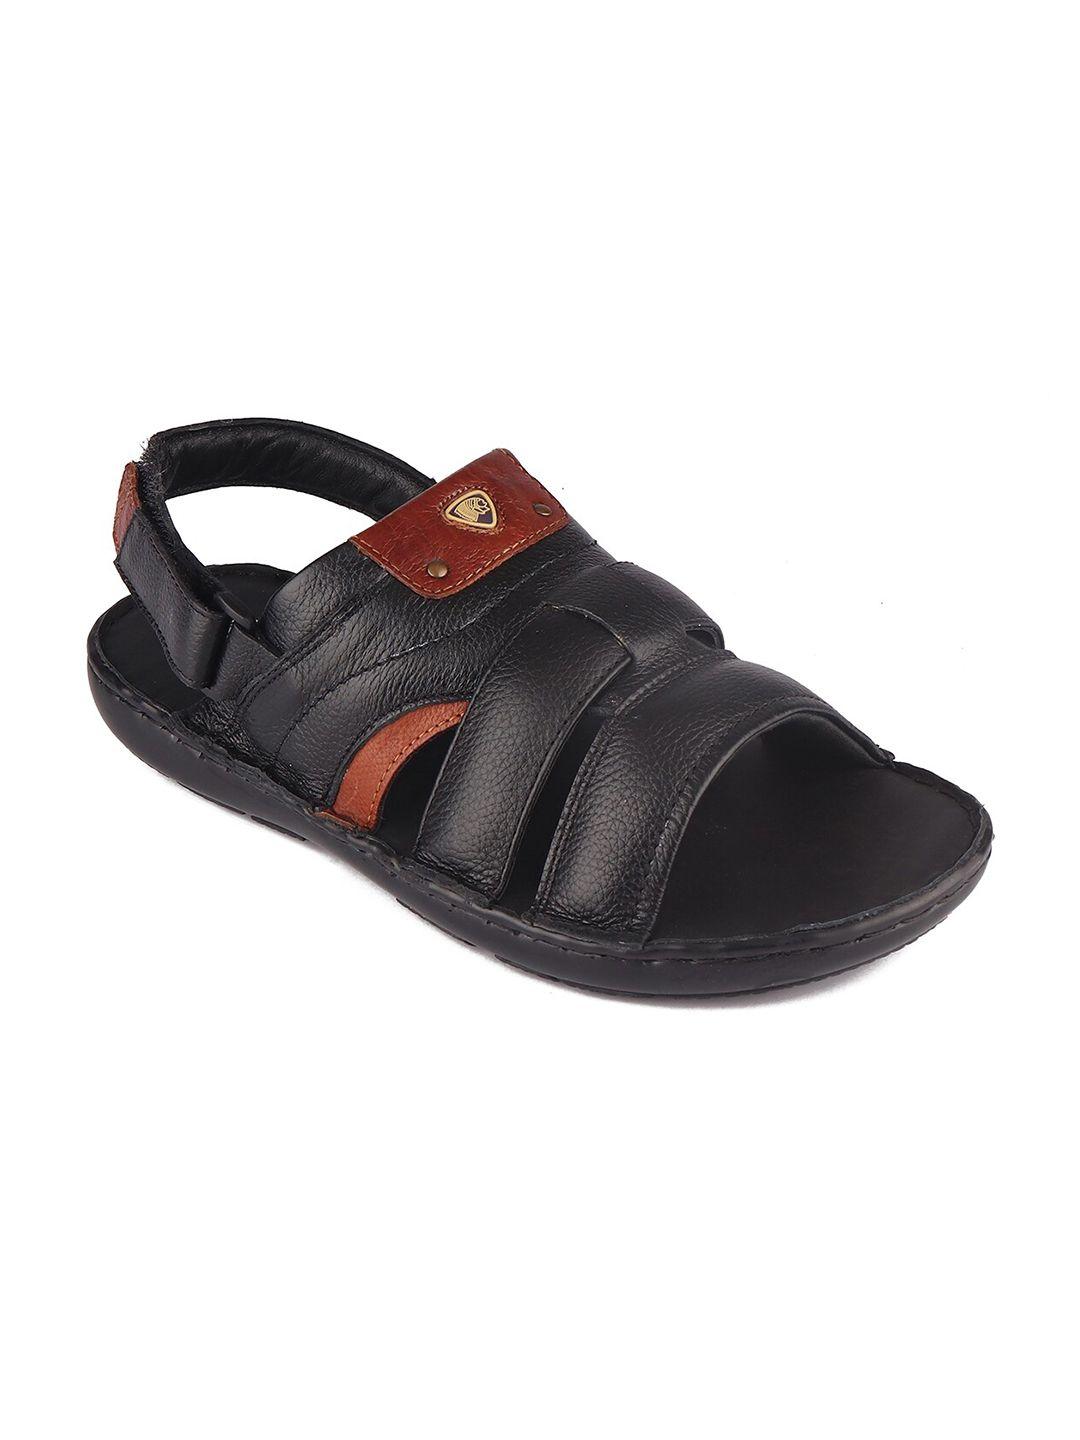 Red Chief Men Black & Brown Leather Comfort Sandals